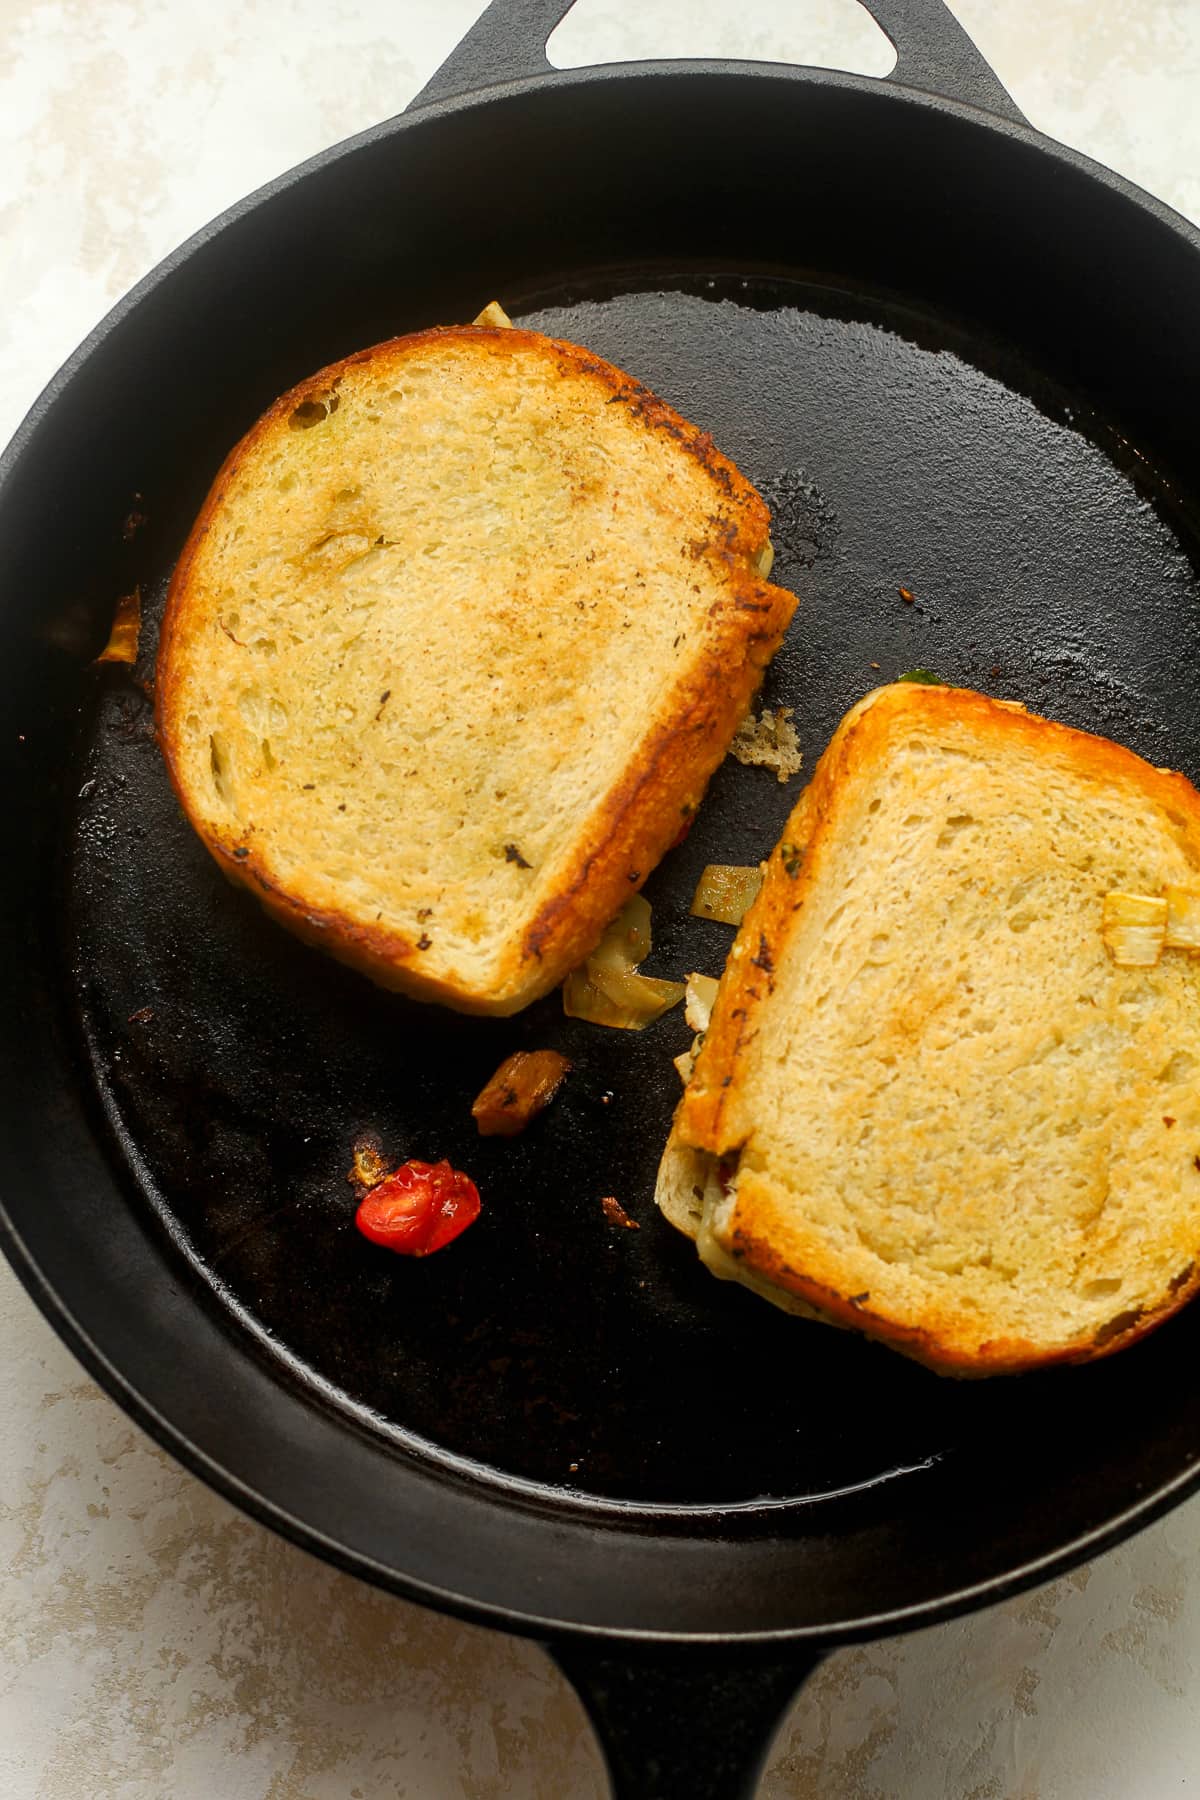 Two grilled sandwiches in a cast iron skillet.